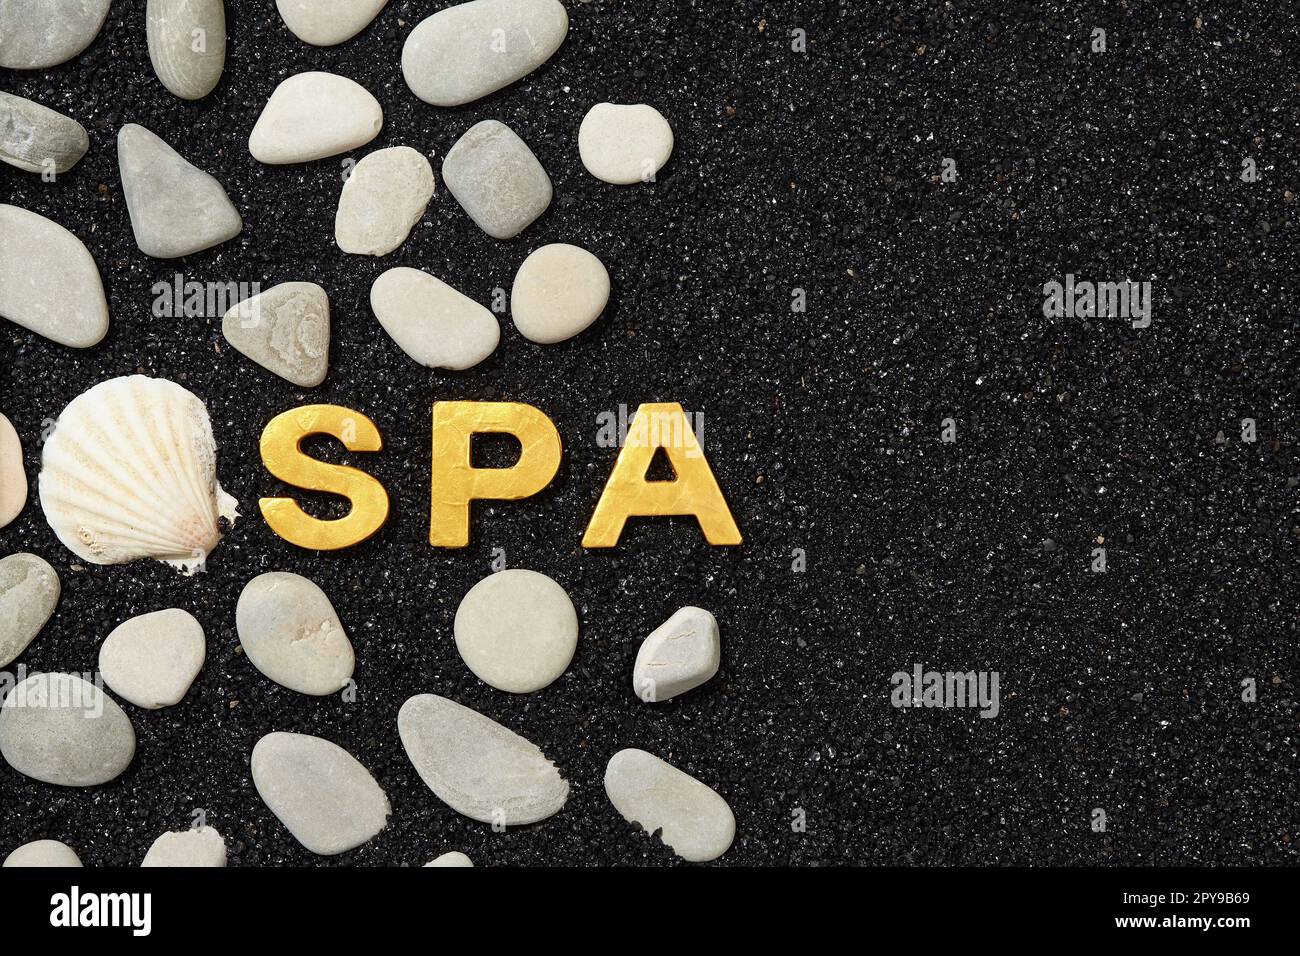 Spa word in black sand with pebbles. Background with space for your own text Stock Photo